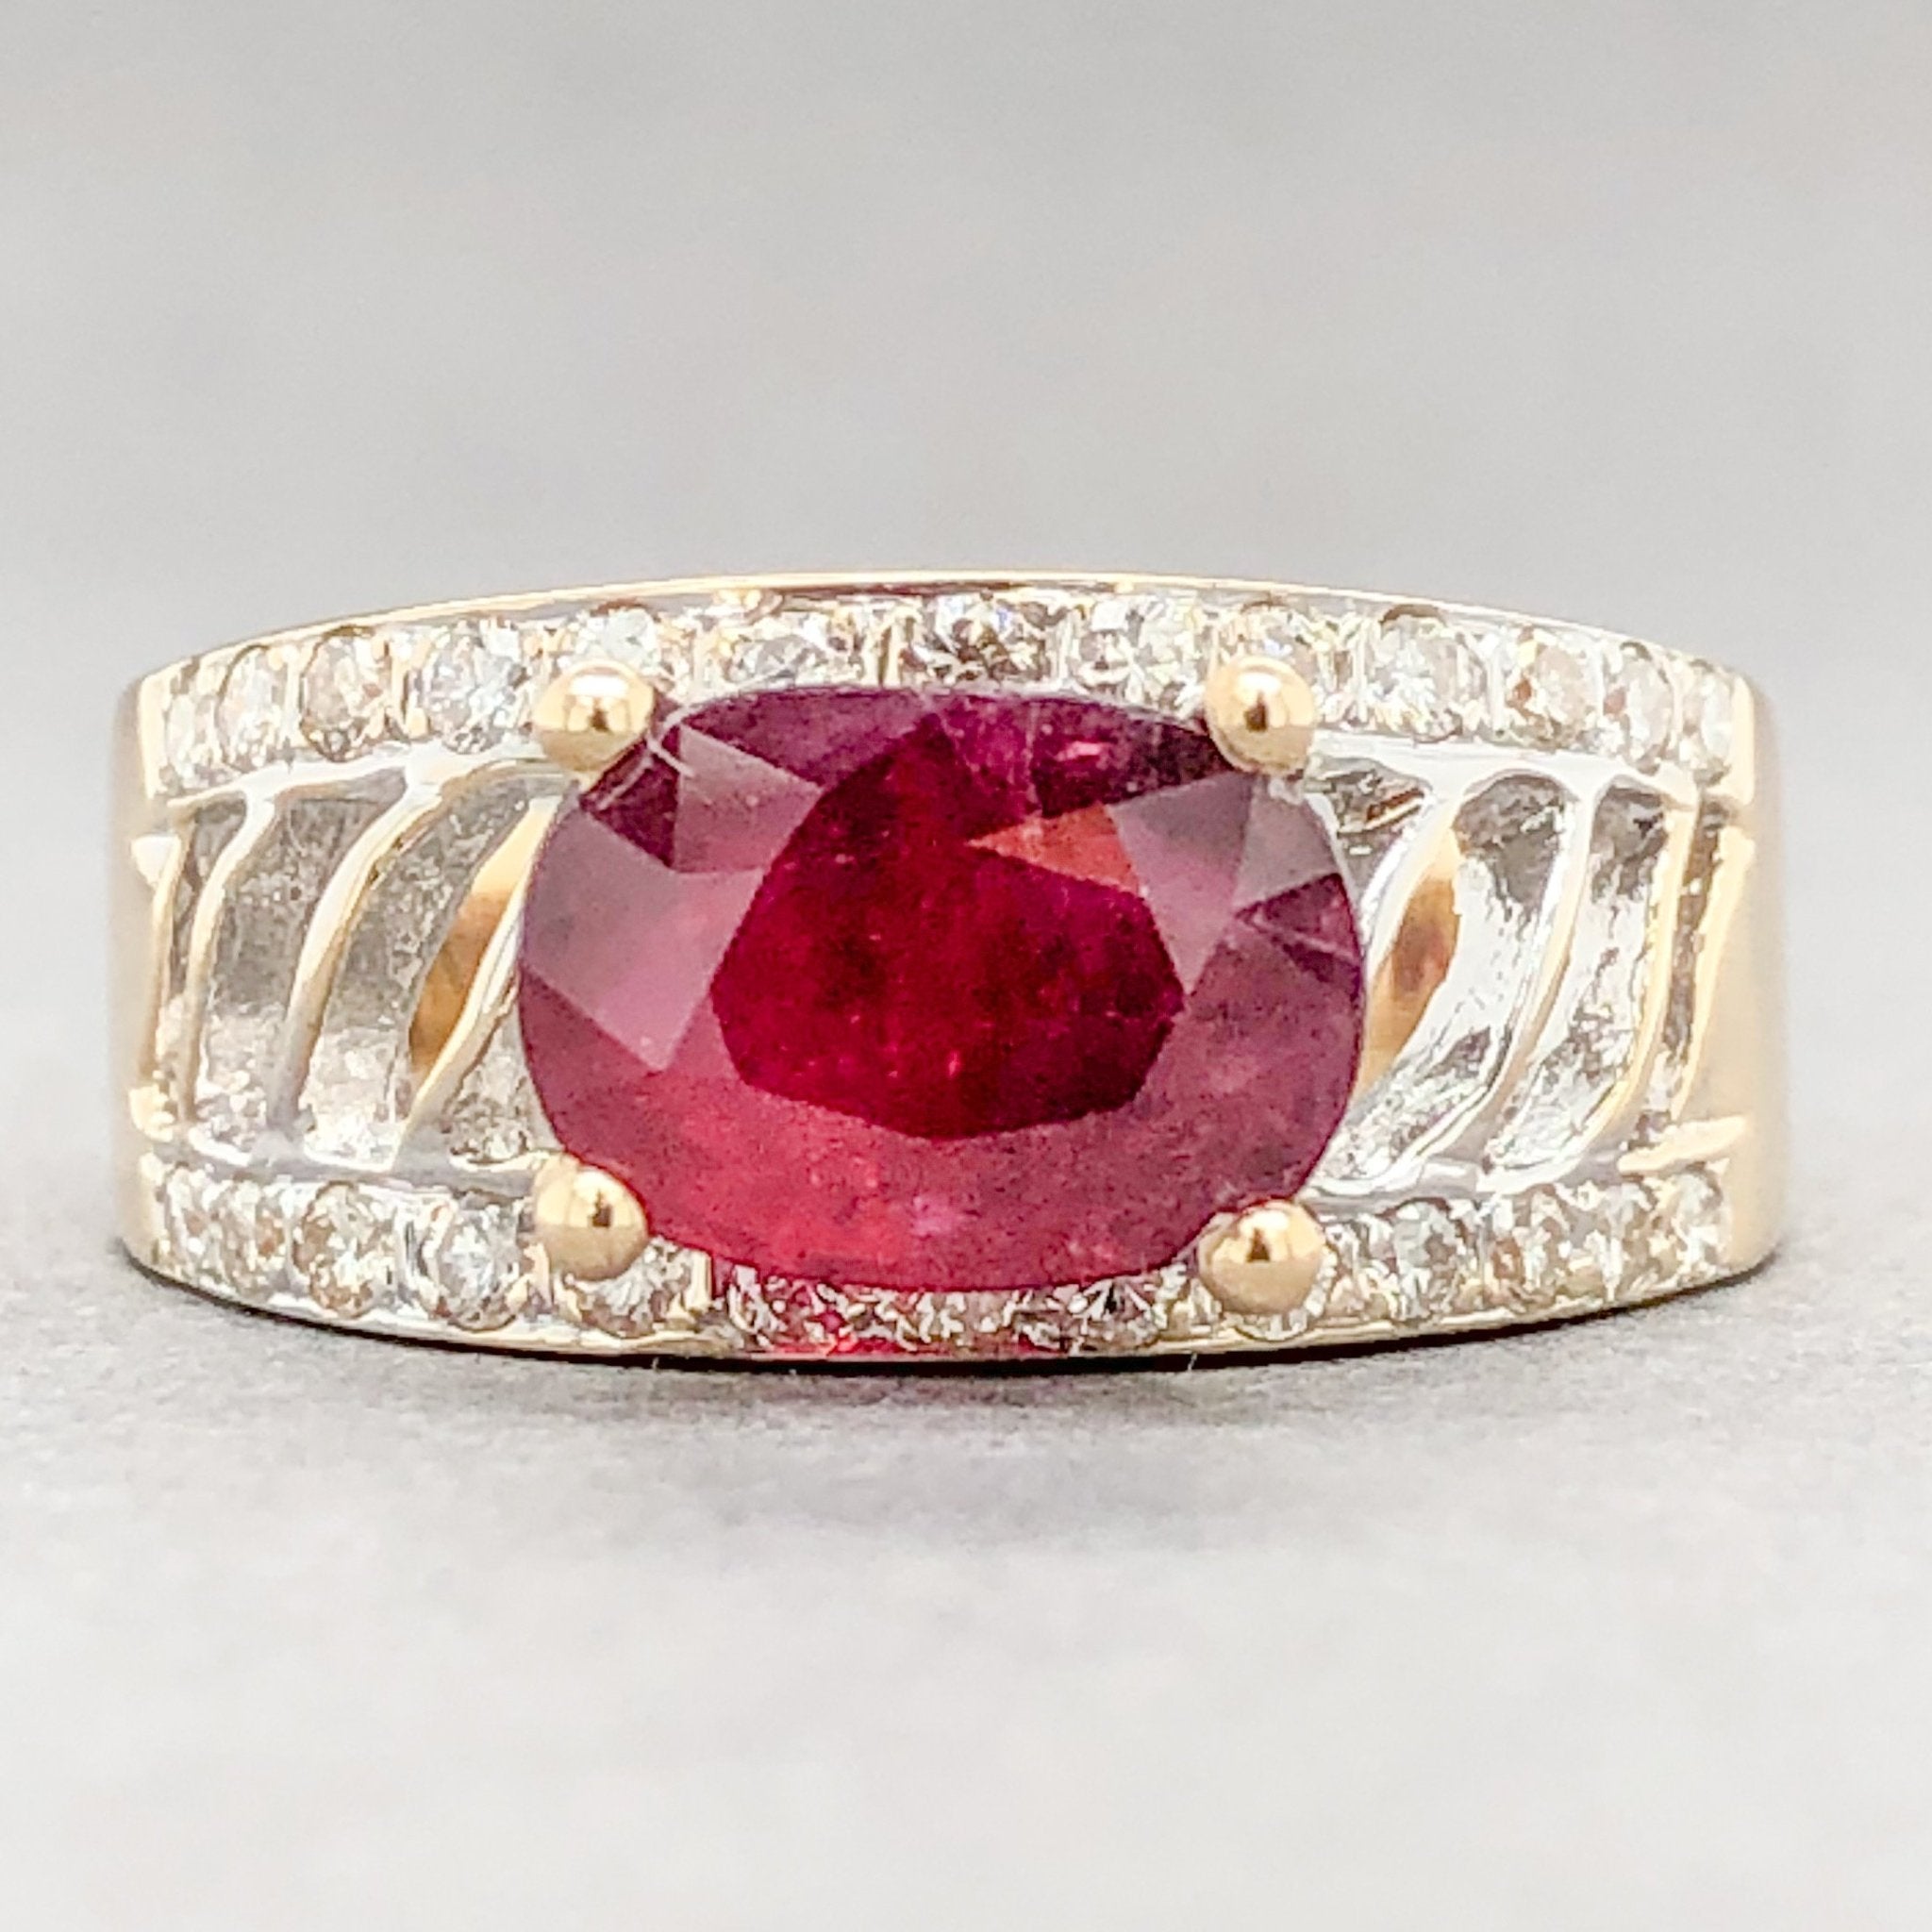 Estate 18K Y Gold 1.53ct Ruby & 0.26cttw H-I/SI1 Diamond Ring